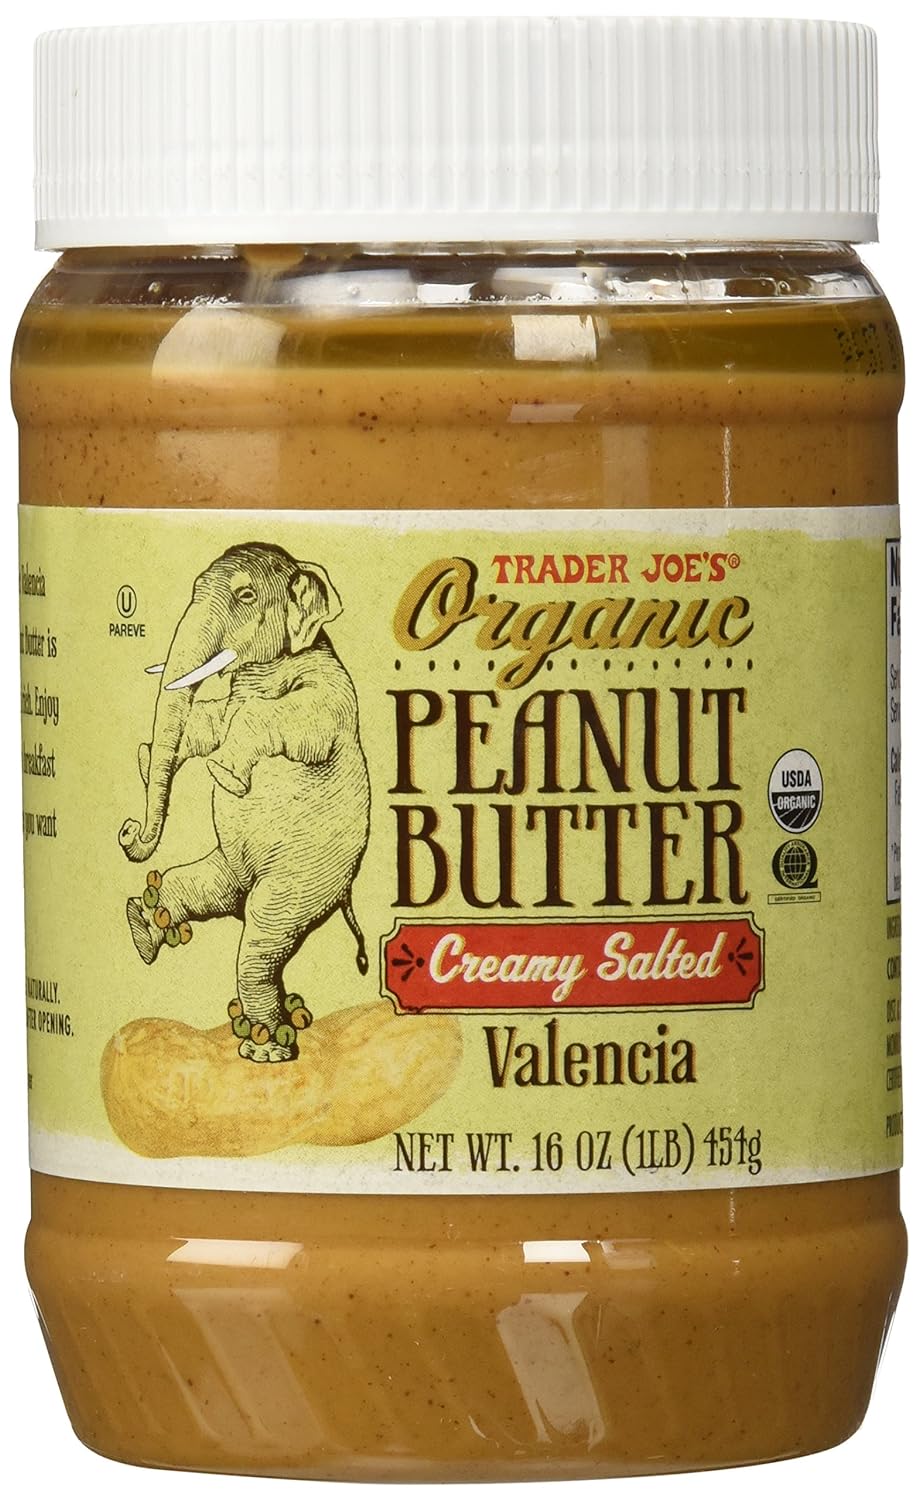 Trader Joe's Organic Peanut Butter Creamy and Salted